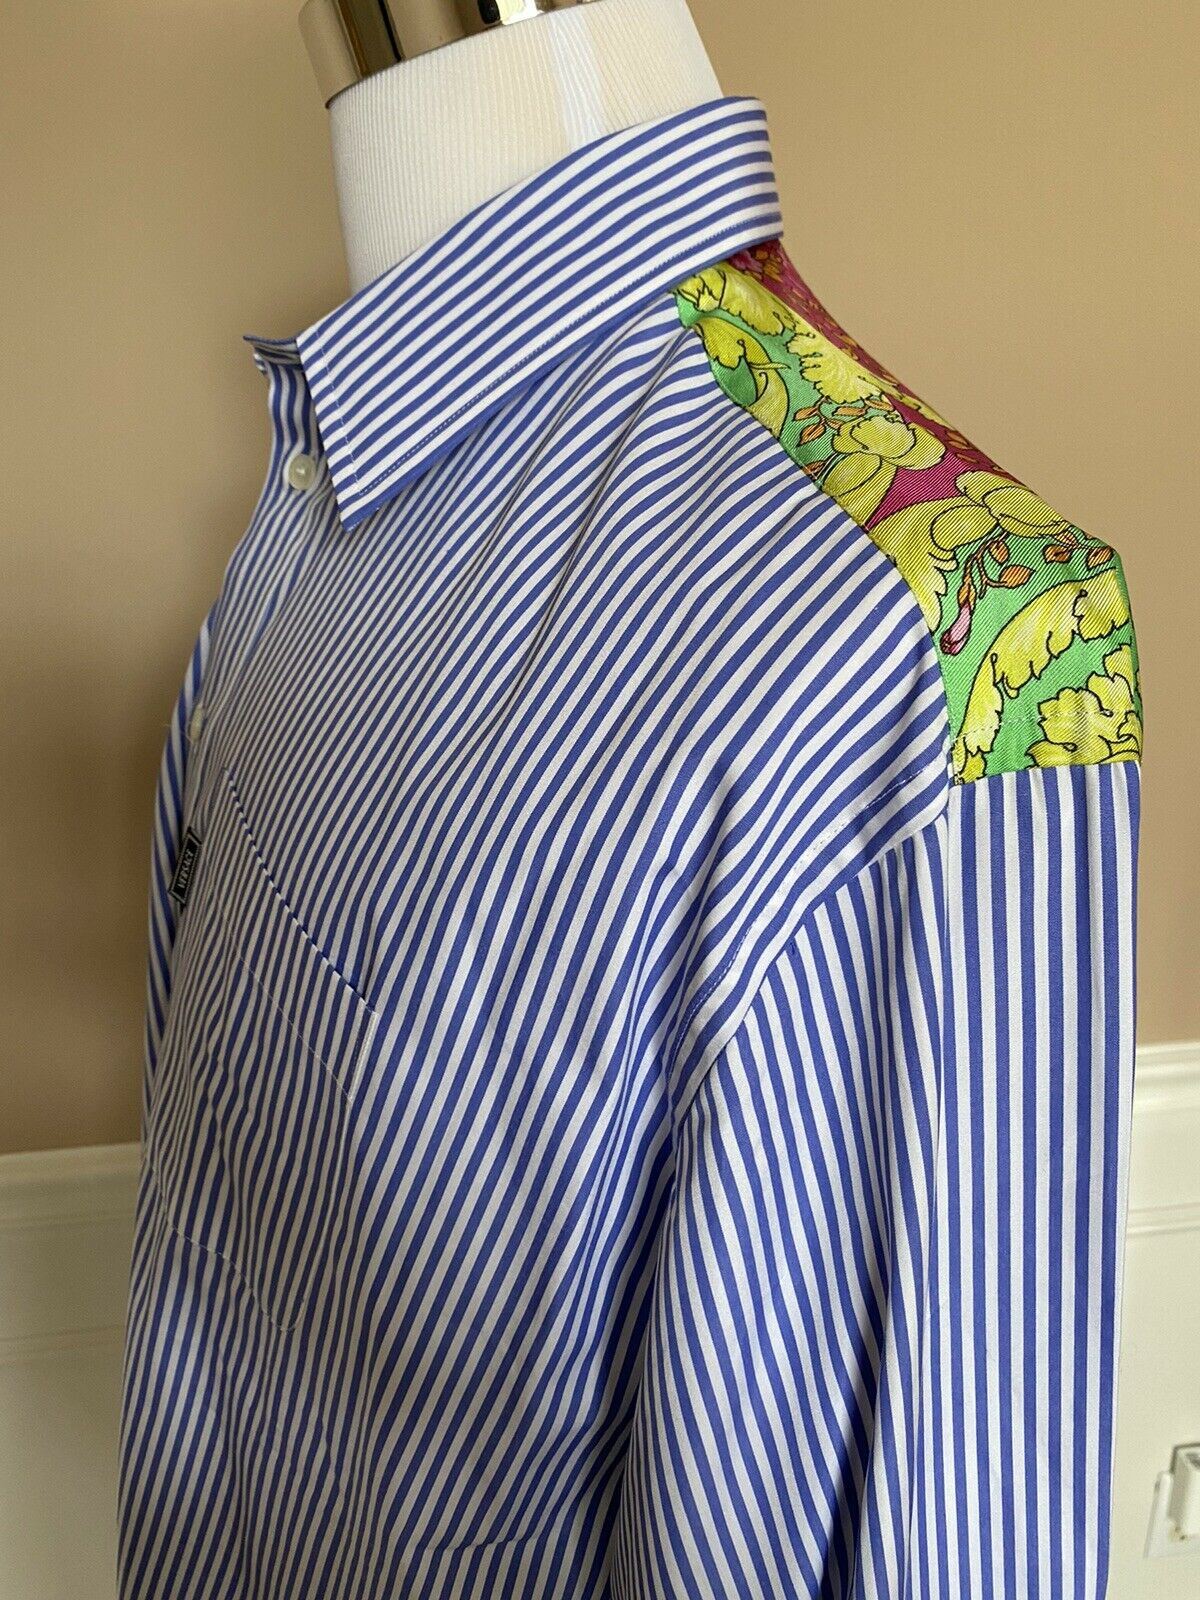 NWT $795 Versace Blue Stripe and Graphic Print Dress Shirt Size 41 A83115 Italy